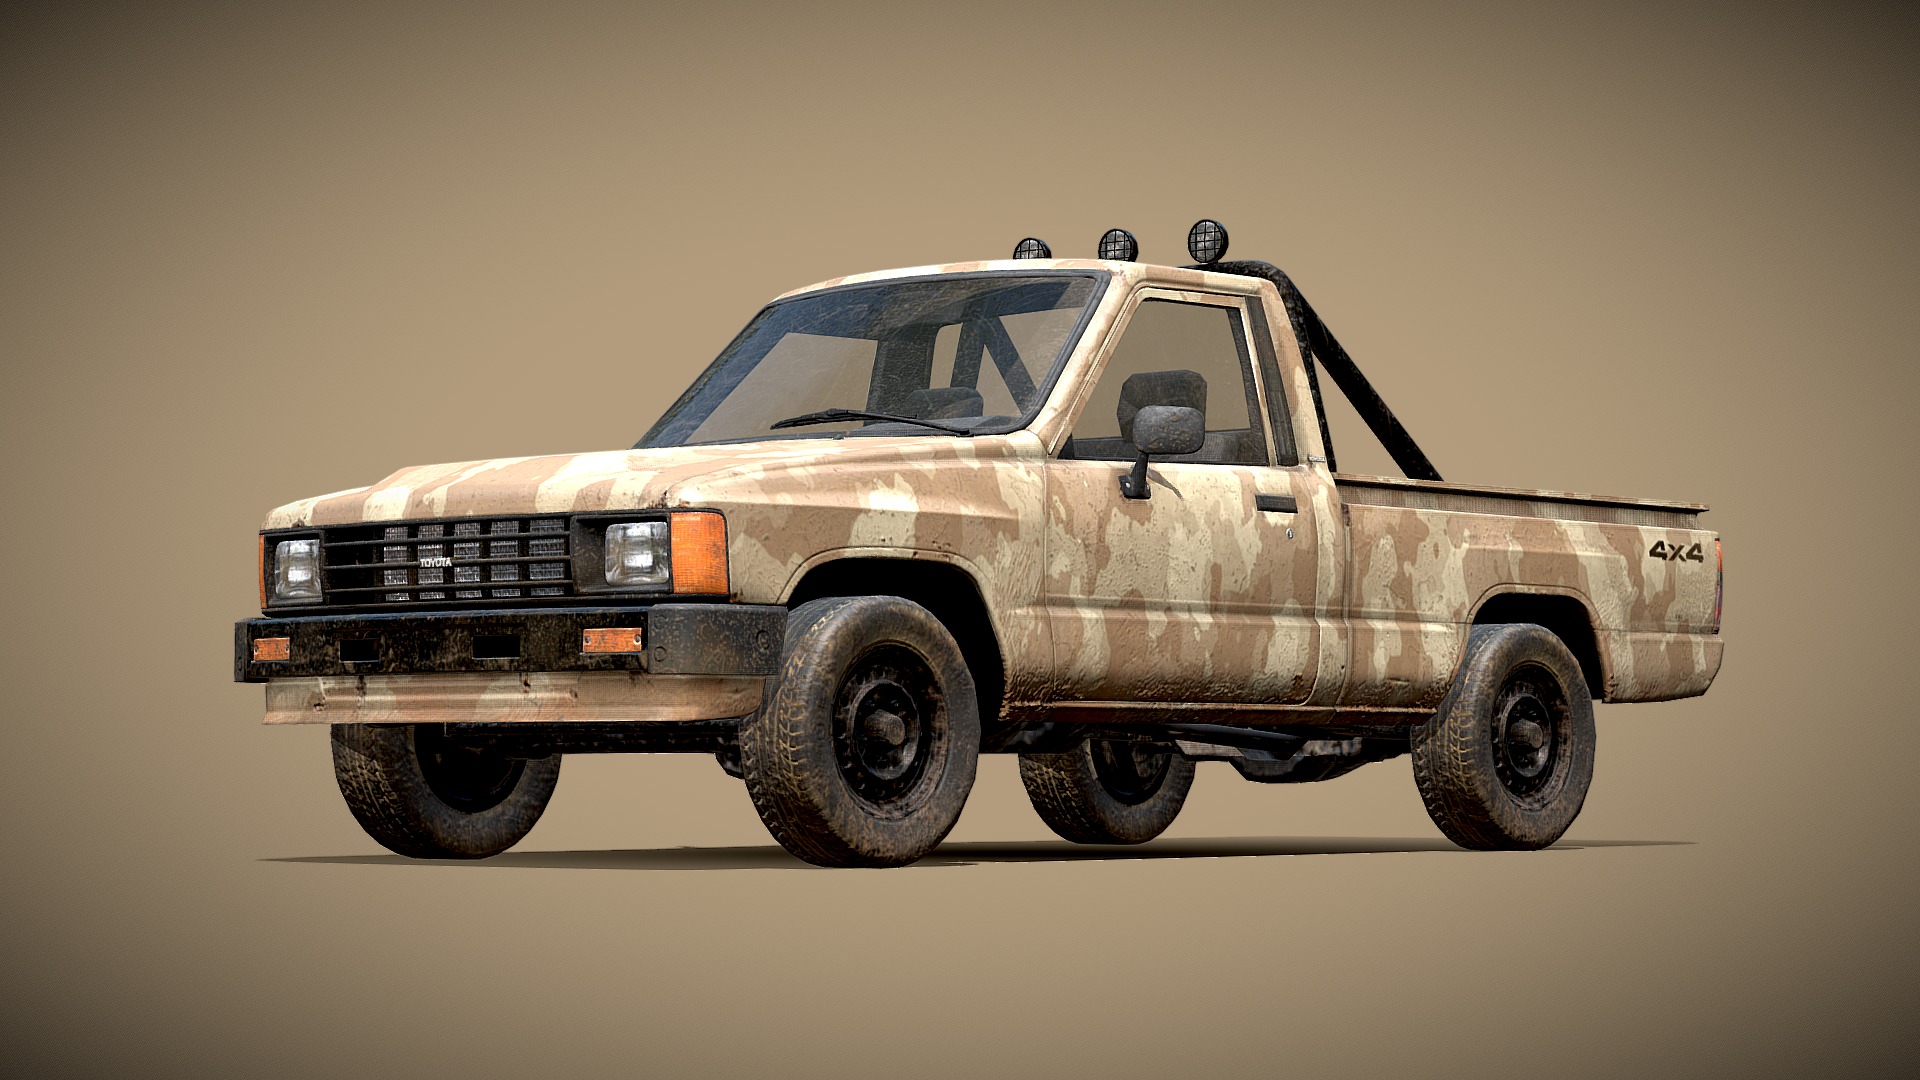 3D model Toyota Hilux 1983 Camouflage - This is a 3D model of the Toyota Hilux 1983 Camouflage. The 3D model is about a brown and white truck.